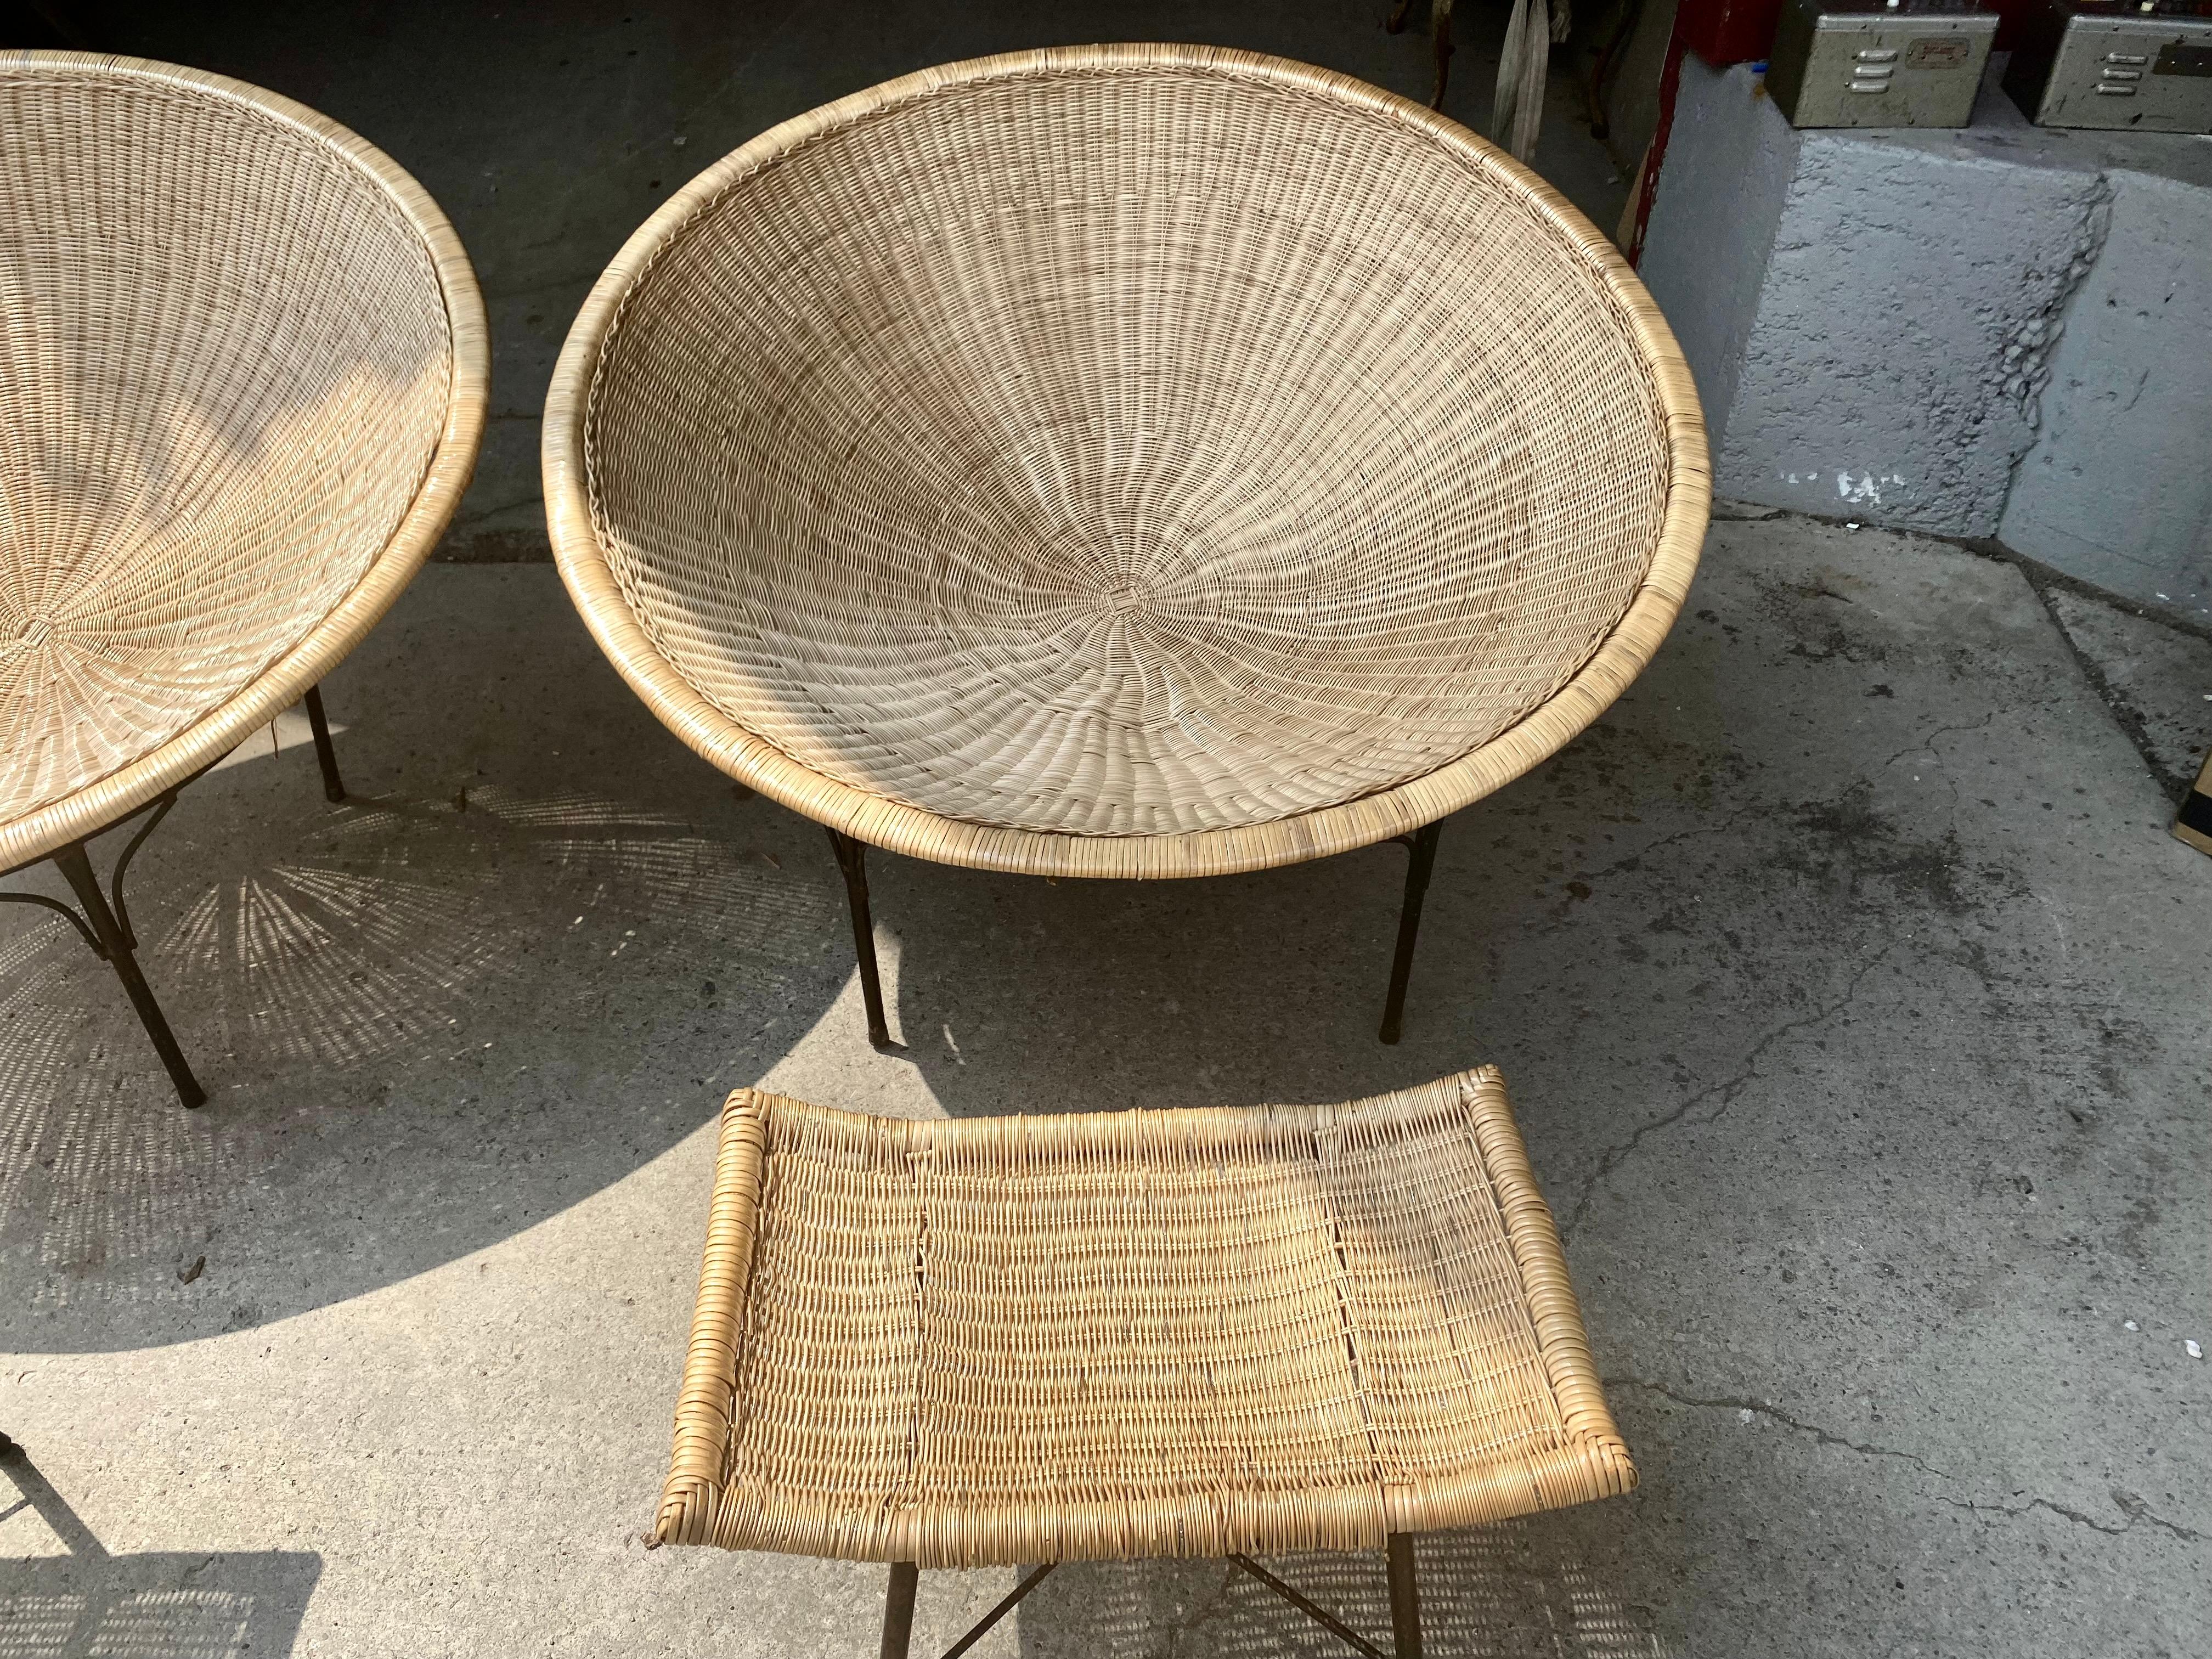 American Oversized Wicker and Iron Hoop Chairs and Ottomans, Modernist / Garden c.1970s For Sale